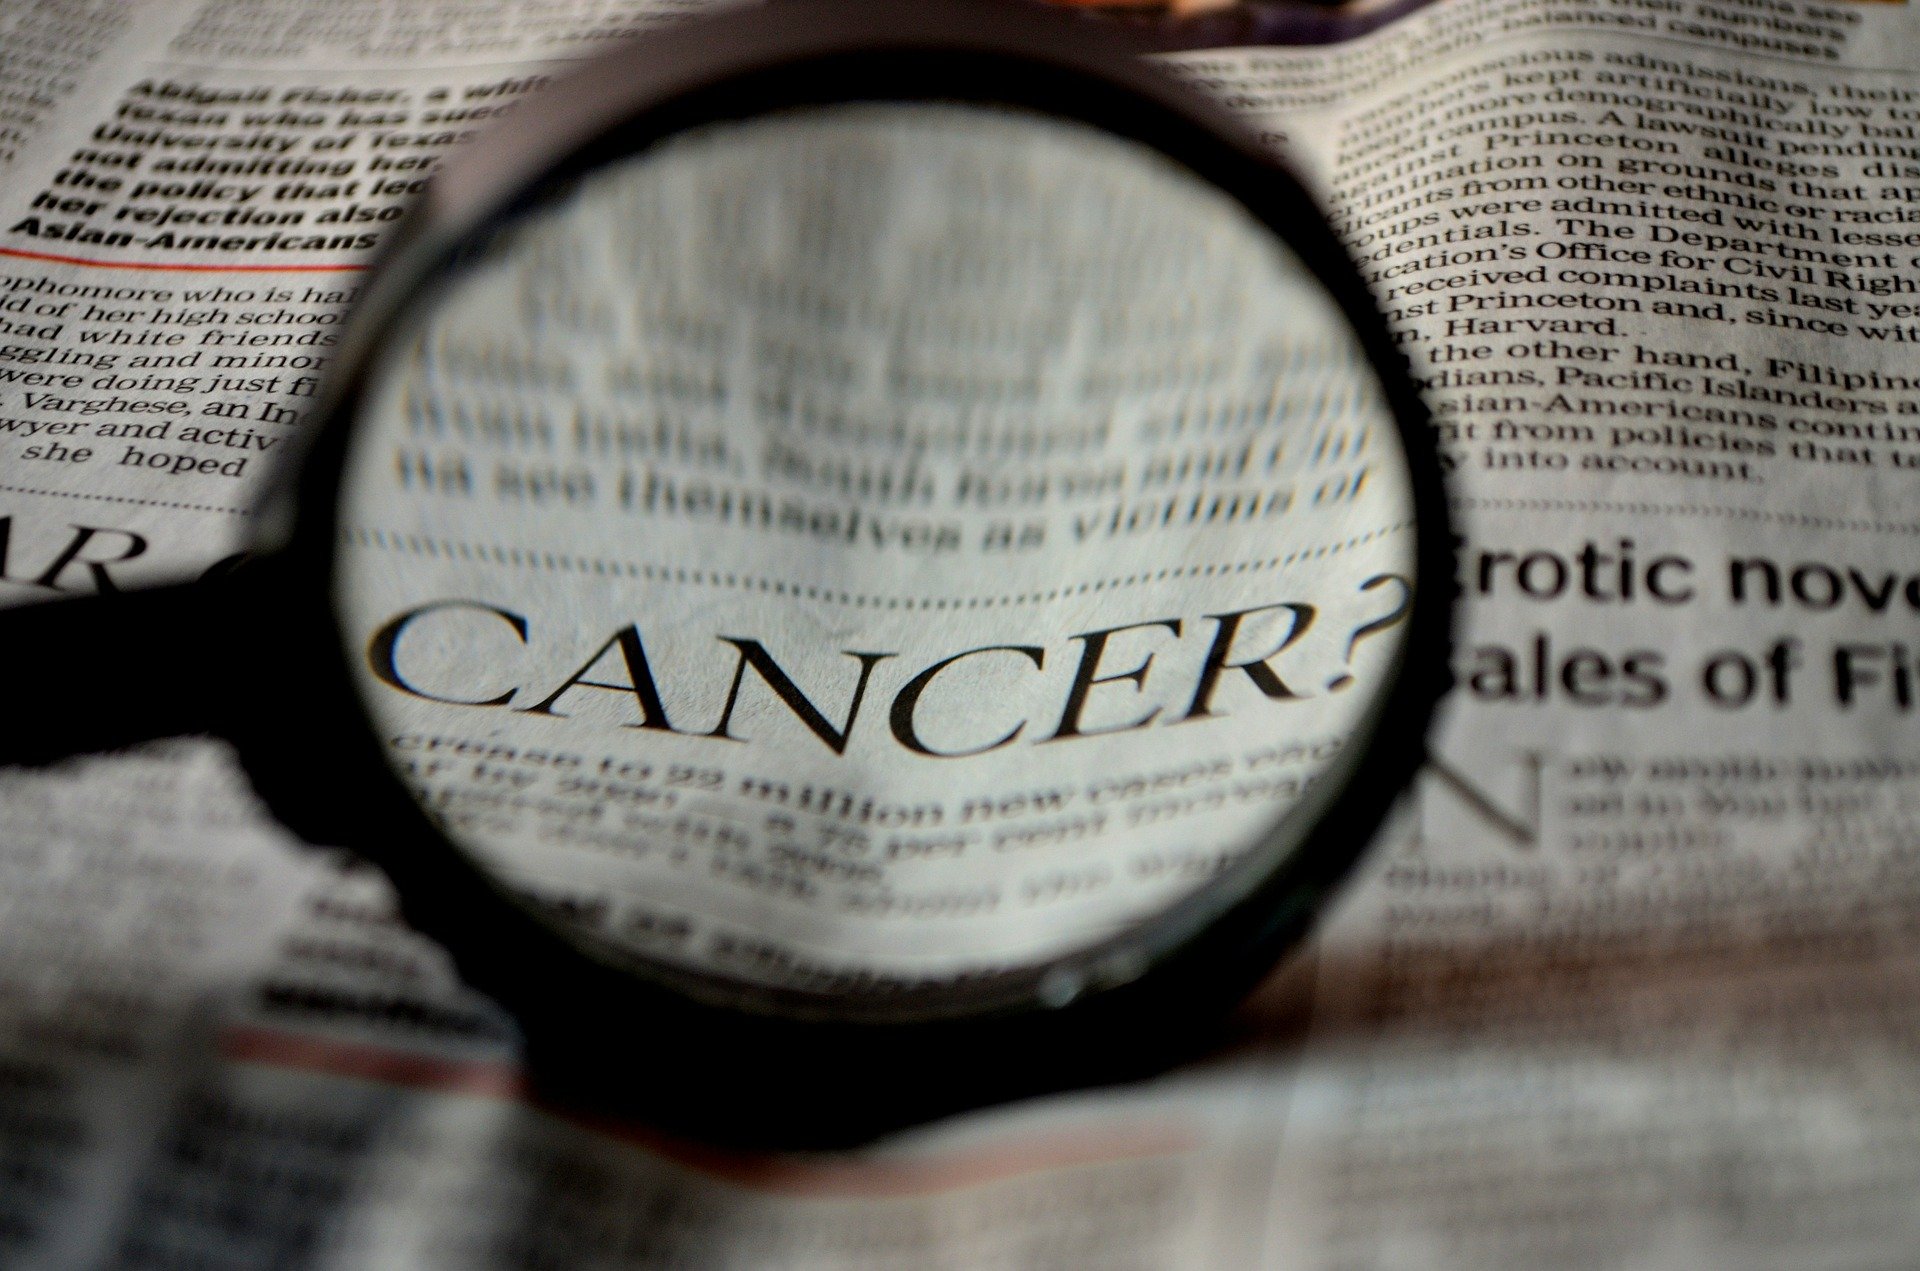 Cancer: Definition, factors, and prevention